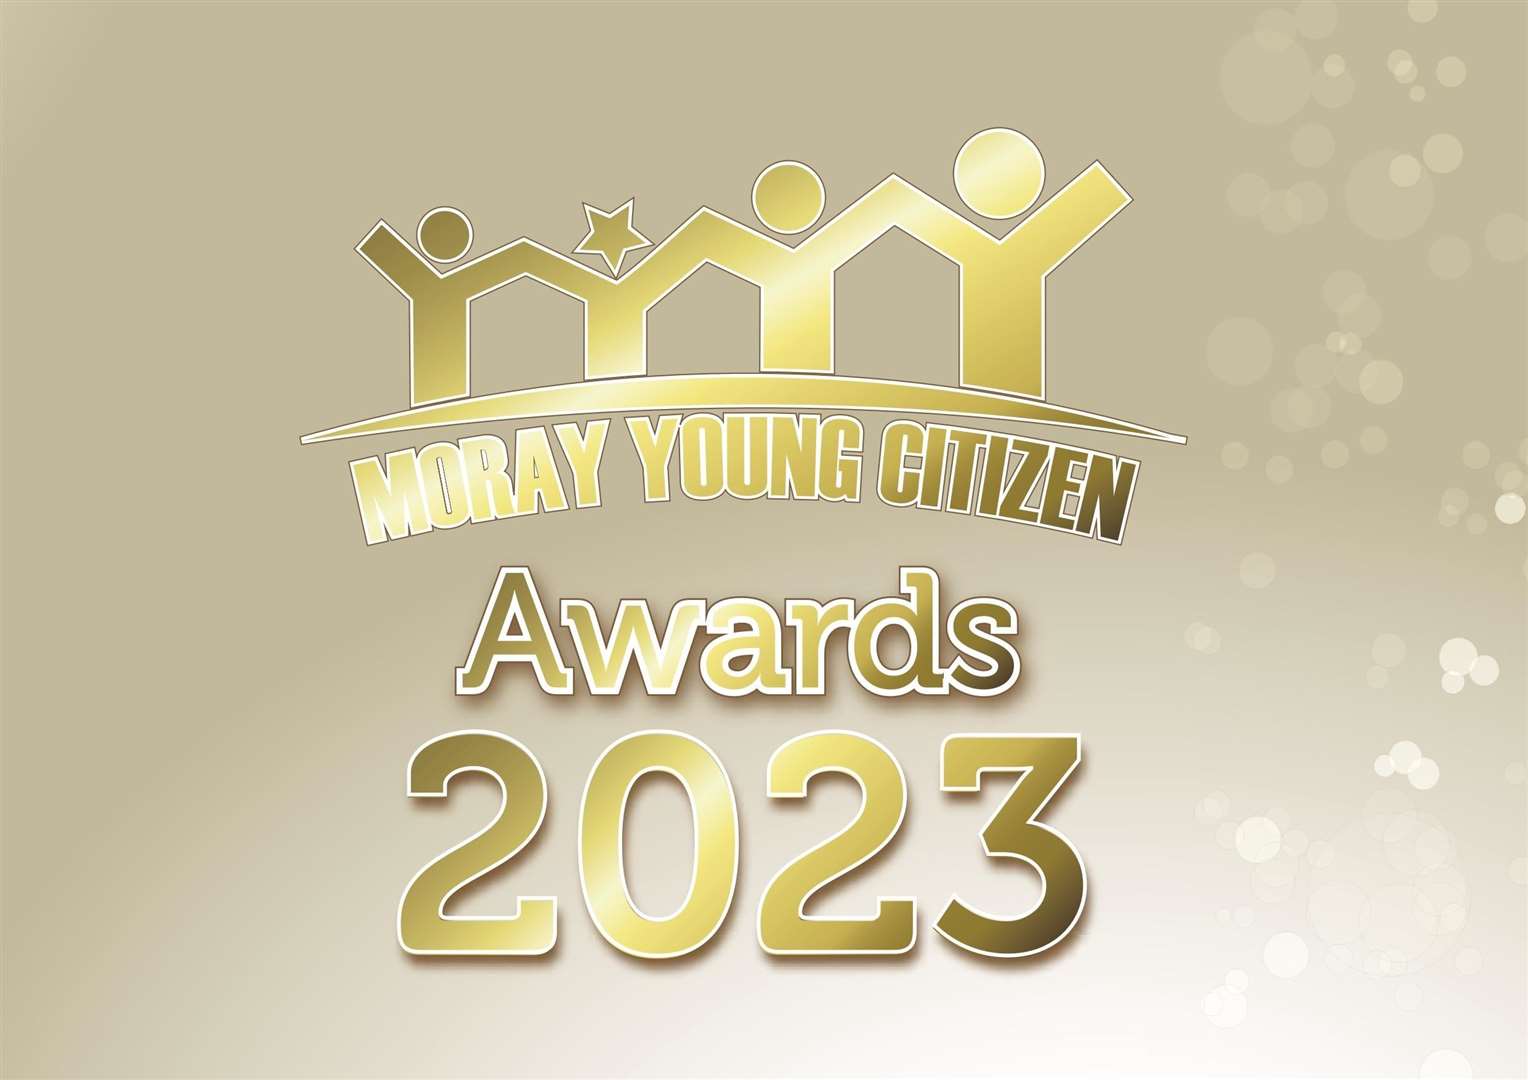 The Moray Young Citizens Awards are set to make a return in 2023.